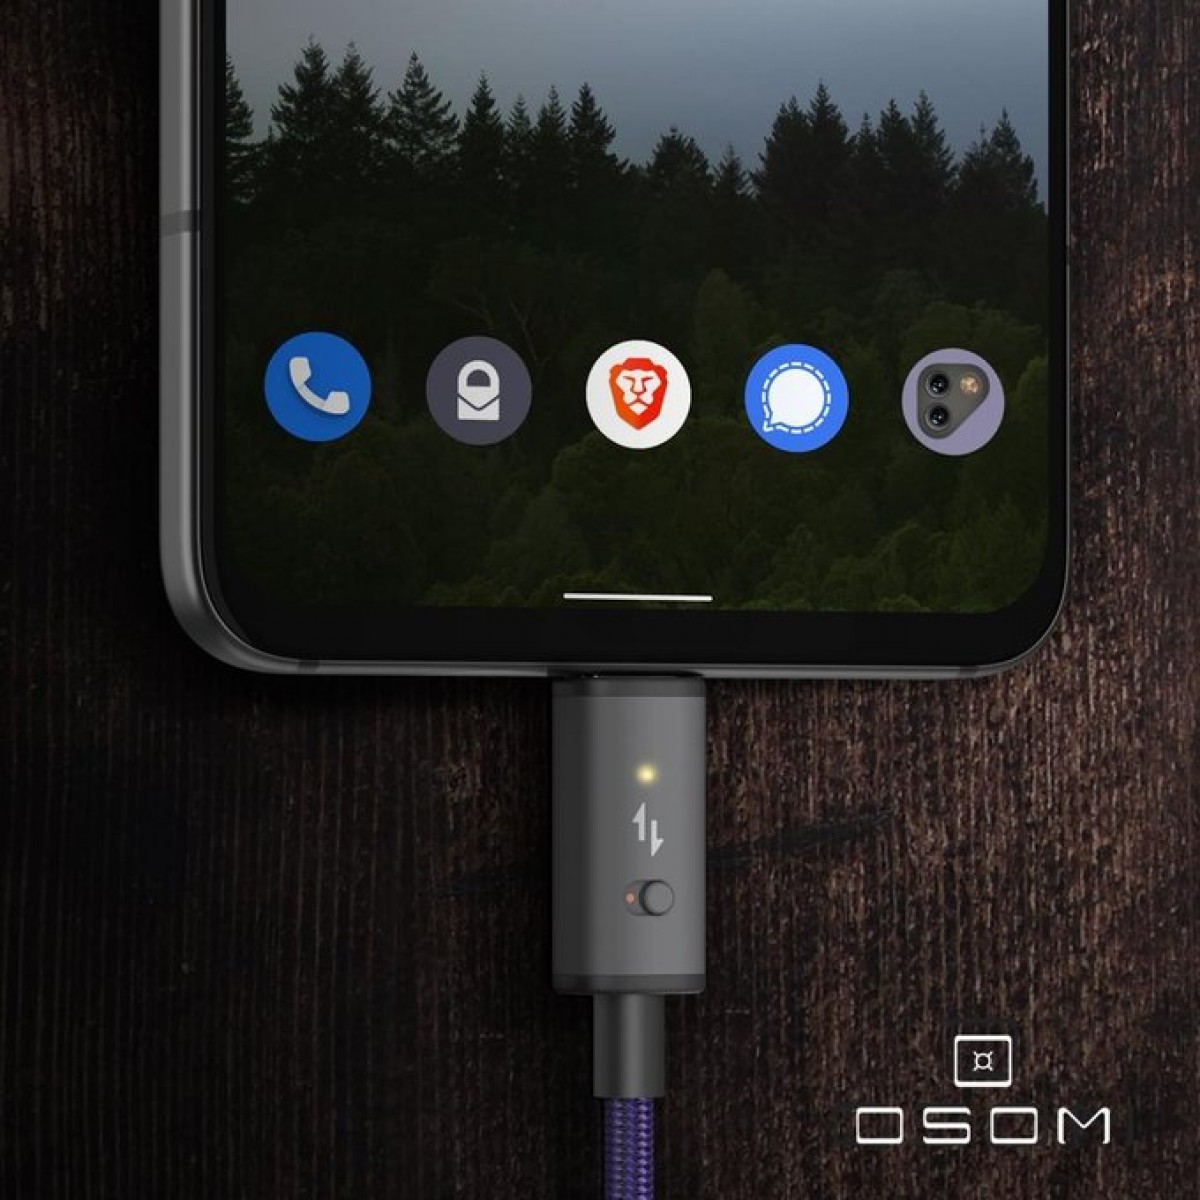 Osom's previously teased privacy cable - its future is uncertain